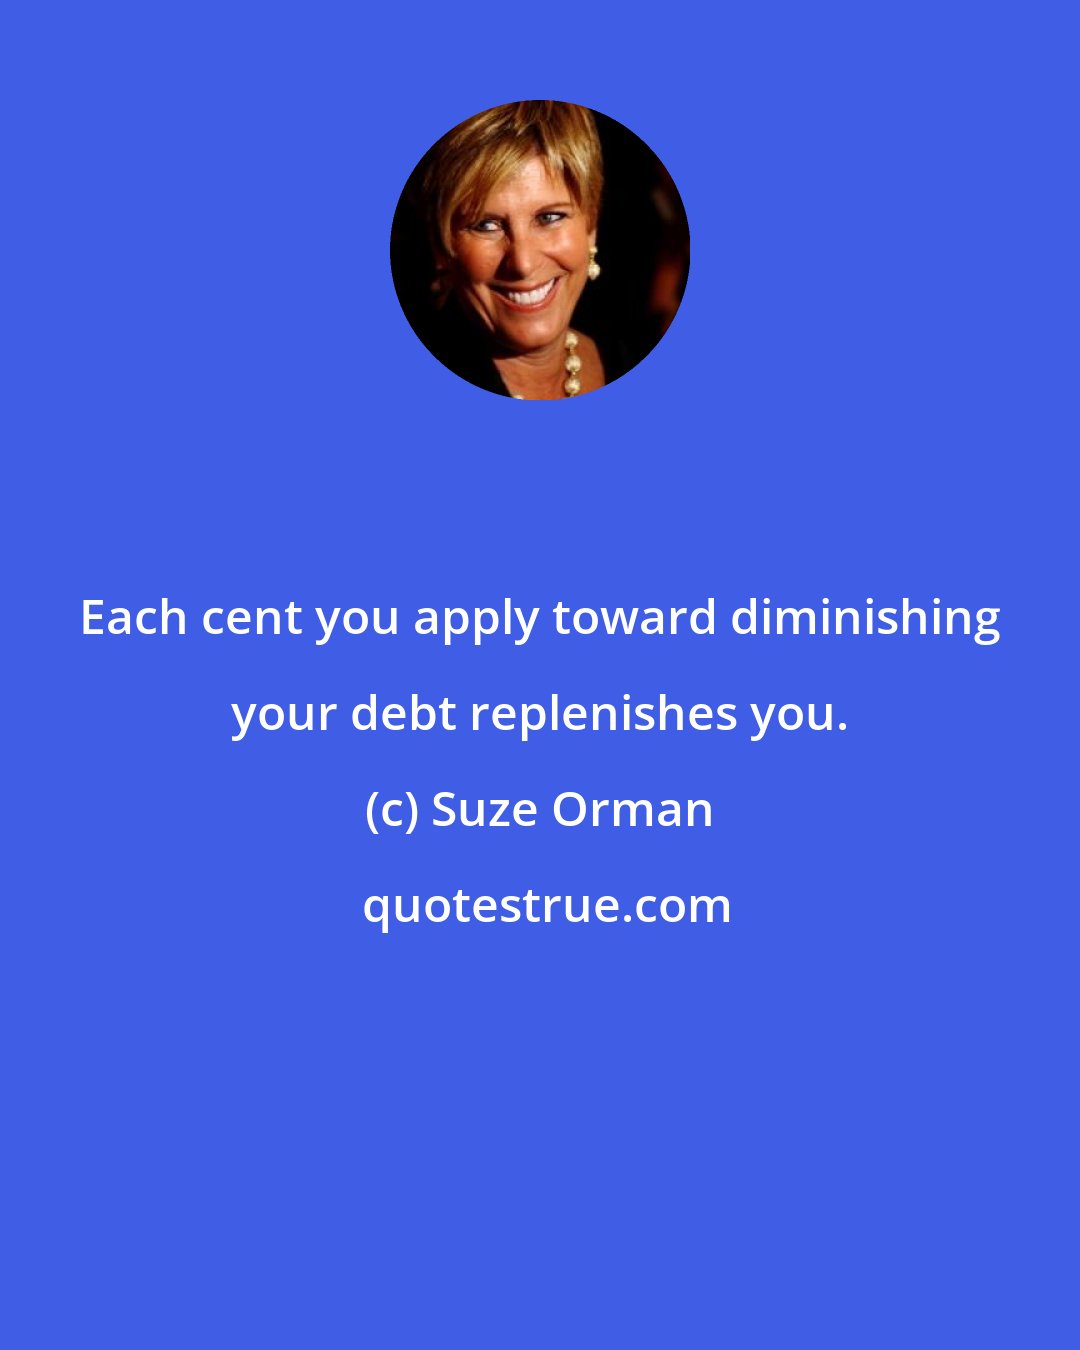 Suze Orman: Each cent you apply toward diminishing your debt replenishes you.